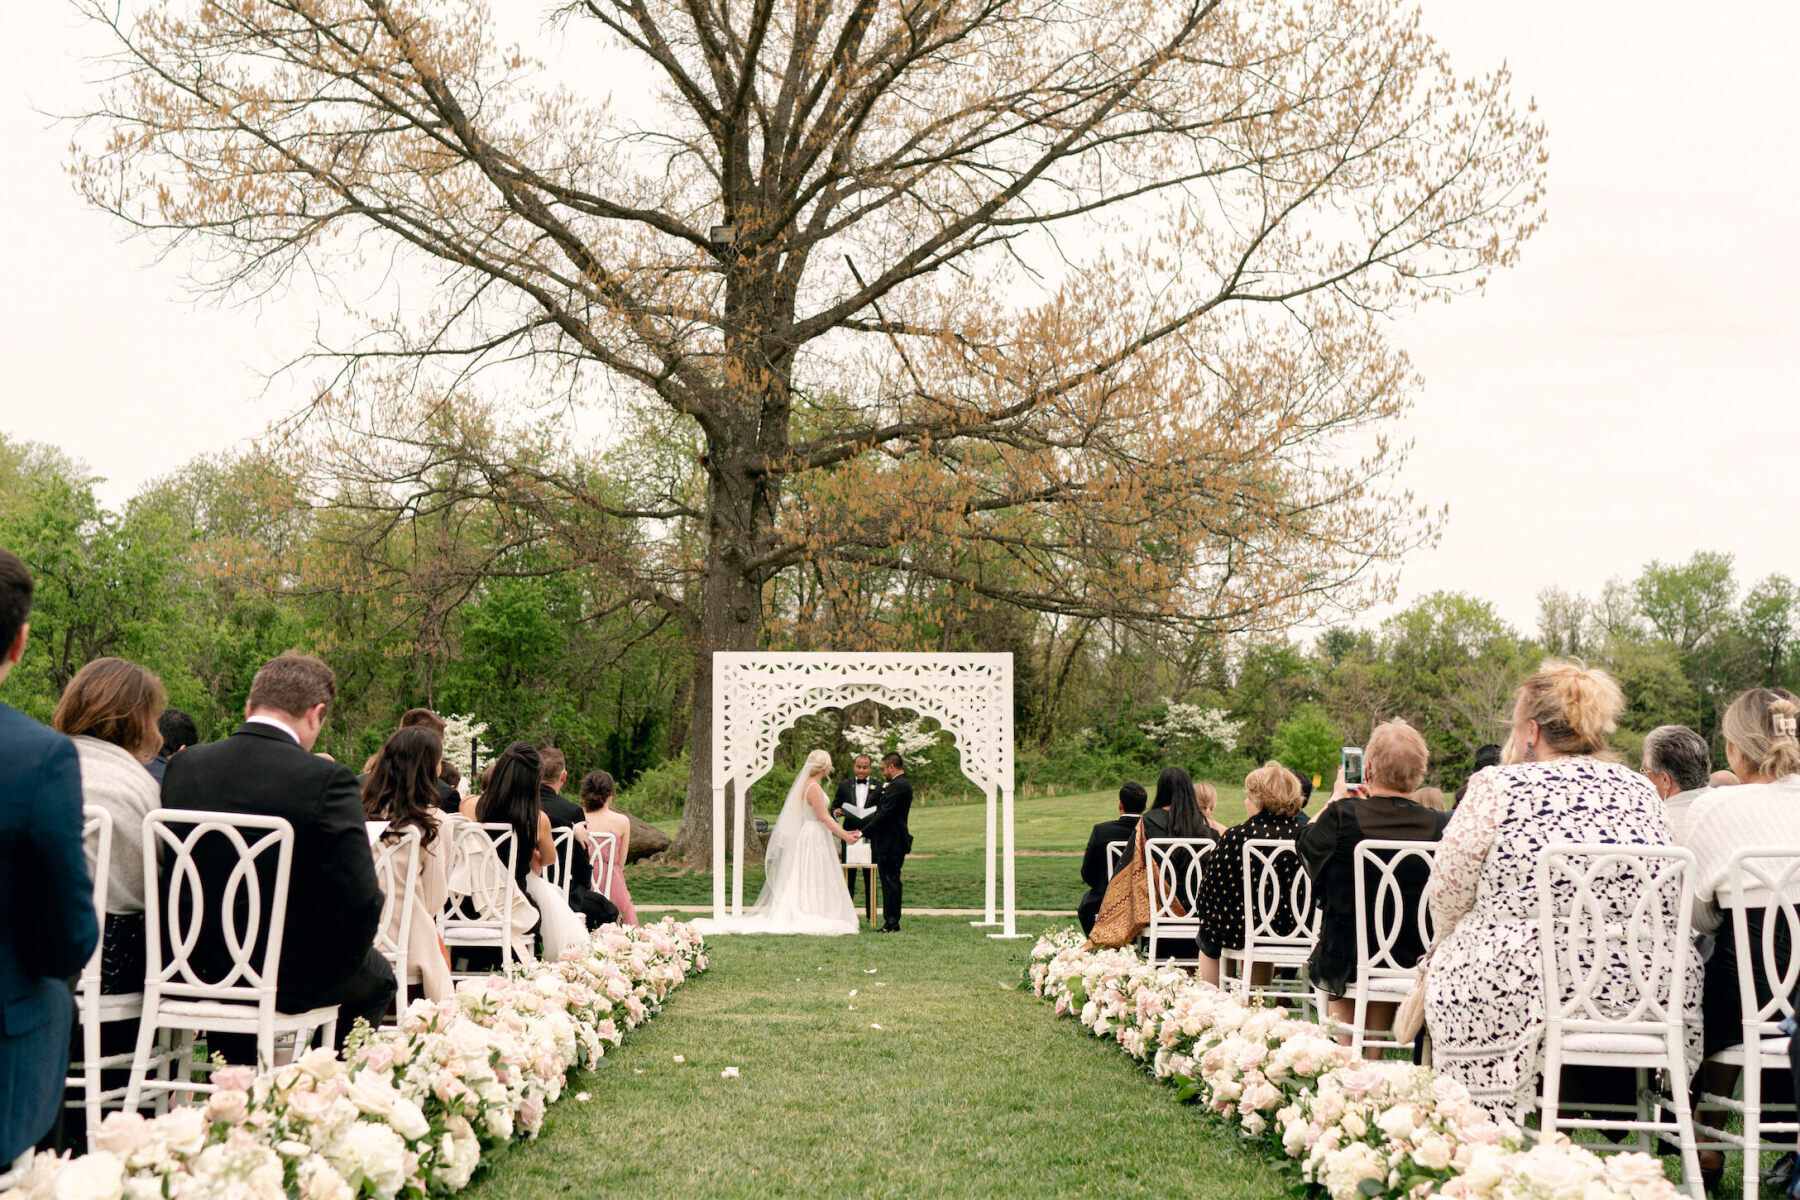 Tented Wedding: A couple standing at the alter of their outdoor wedding ceremony.